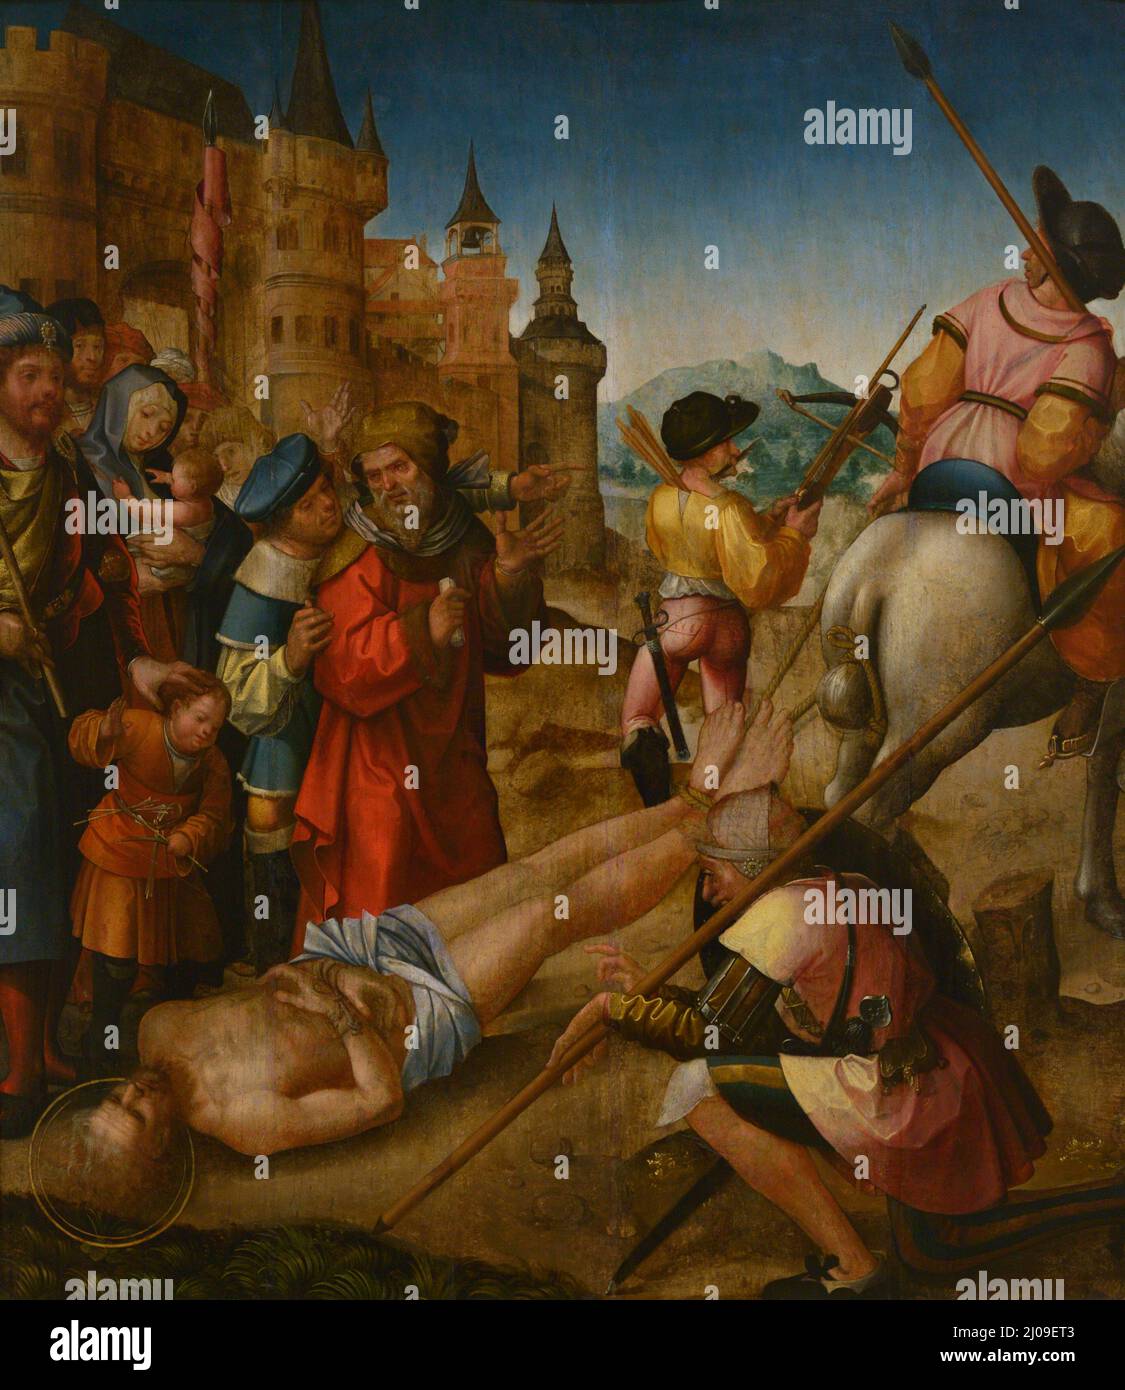 Cristóvao de Figueiredo. Portuguese painter (active 1515-1555). The Martyrdom of St. Hippolytus, 1520-1530. Oil on oak wood. From the University of Coimbra. National Museum of Ancient Art. Lisbon, Portugal. Stock Photo